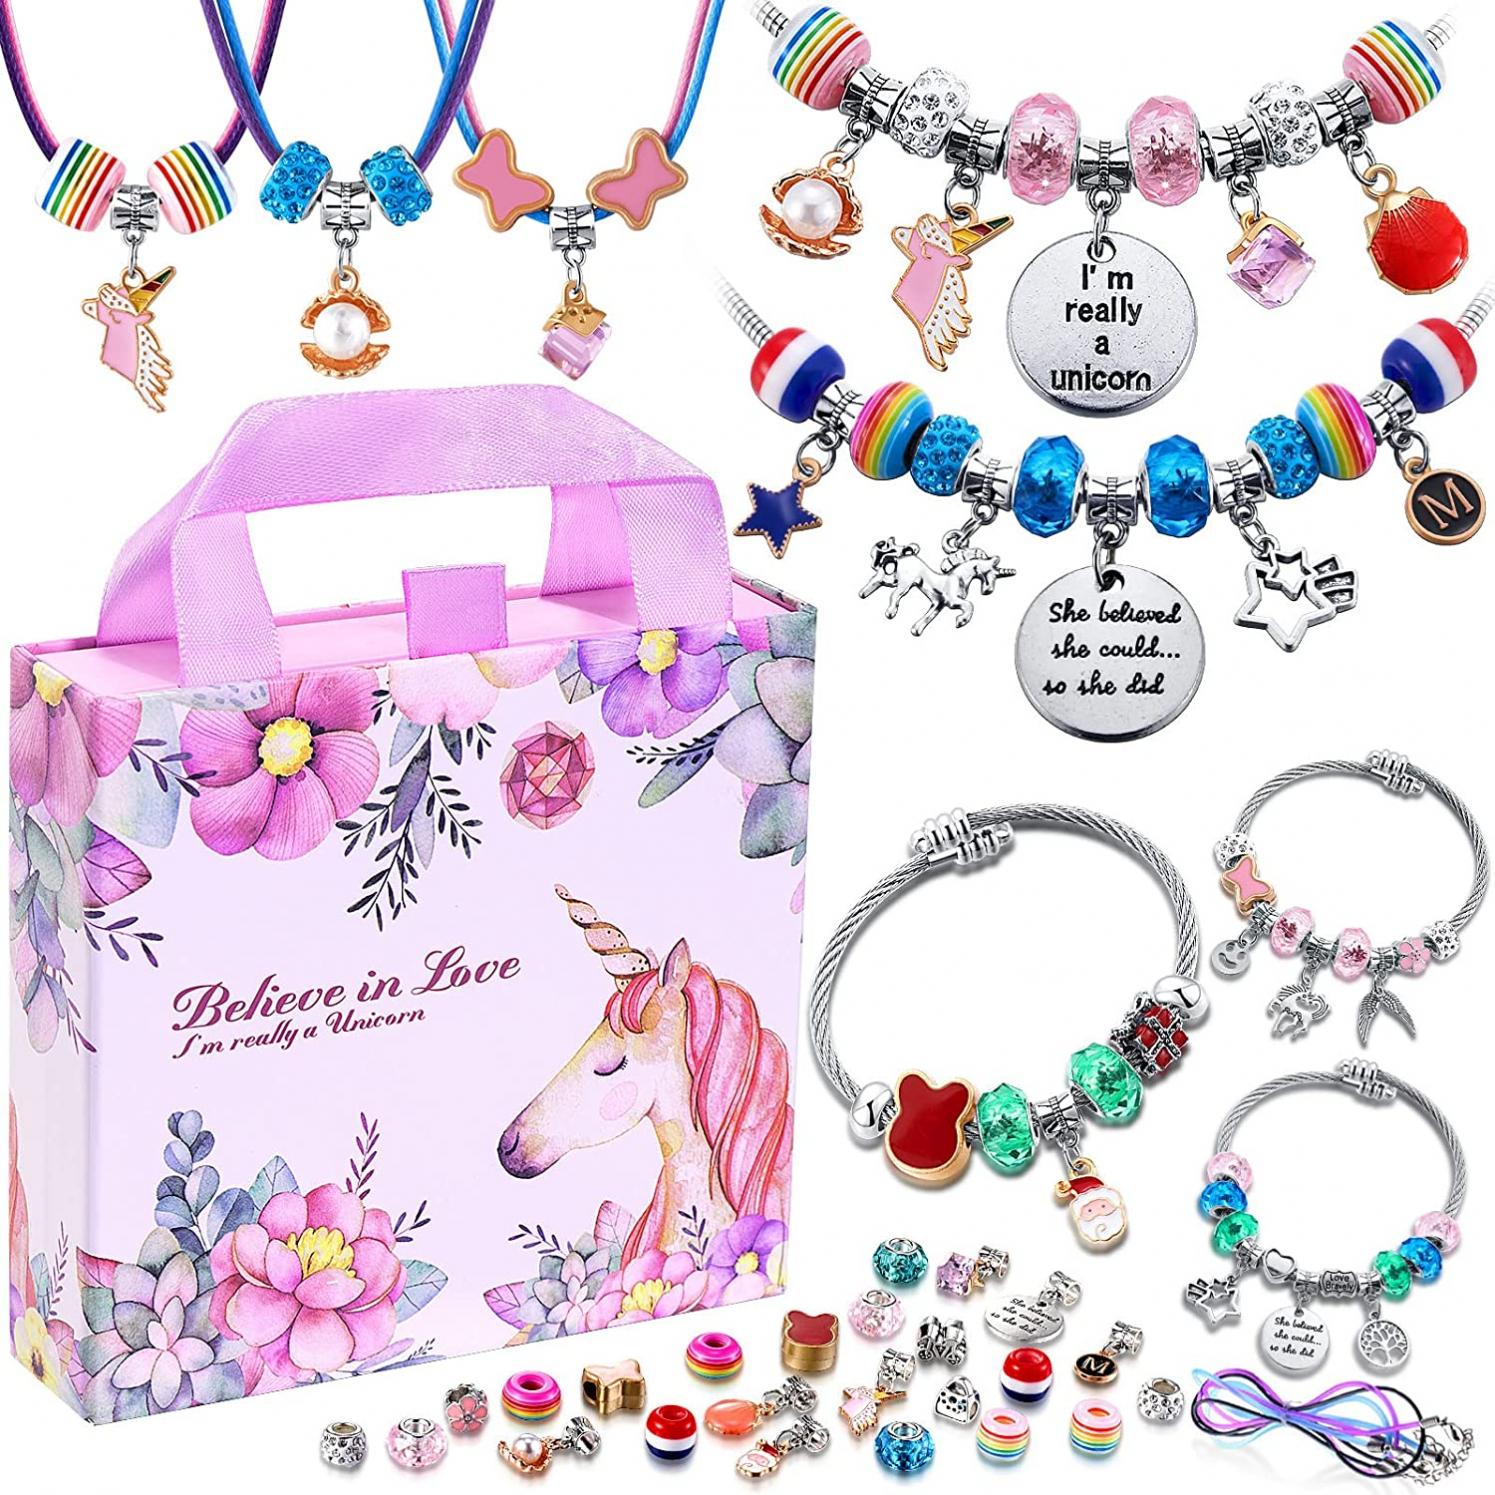 COO&KOO Charm Bracelet Making Kit, Jewelry Making Supplies Mermaid Unicorn Gifts for Teen Girls Crafts for Girls Ages 8-12